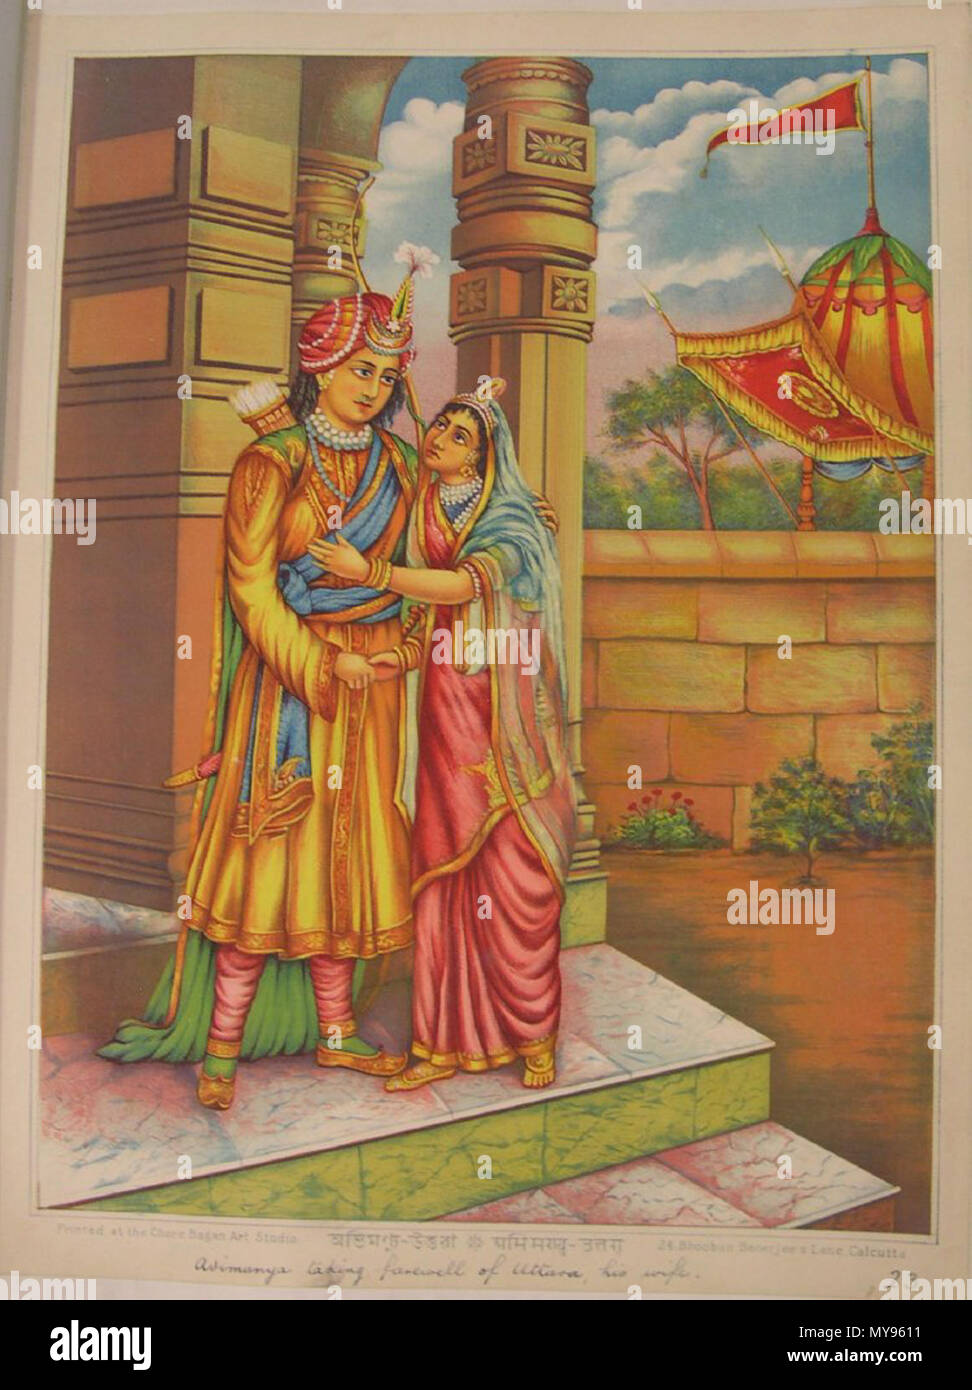 . English: Album of popular prints mounted on cloth pages. Colour lithograph, lettered, inscribed and numbered 23. In this illustration of a narrative from the Mahabharata, Abhimanyu bids farewell to his wife Uttara. He is leaving for the Kurukshetra war. circa 1895. Printed by Chore Bagan Art Studio 21 Abhimanyu bids farewell to his wife Uttara. Stock Photo